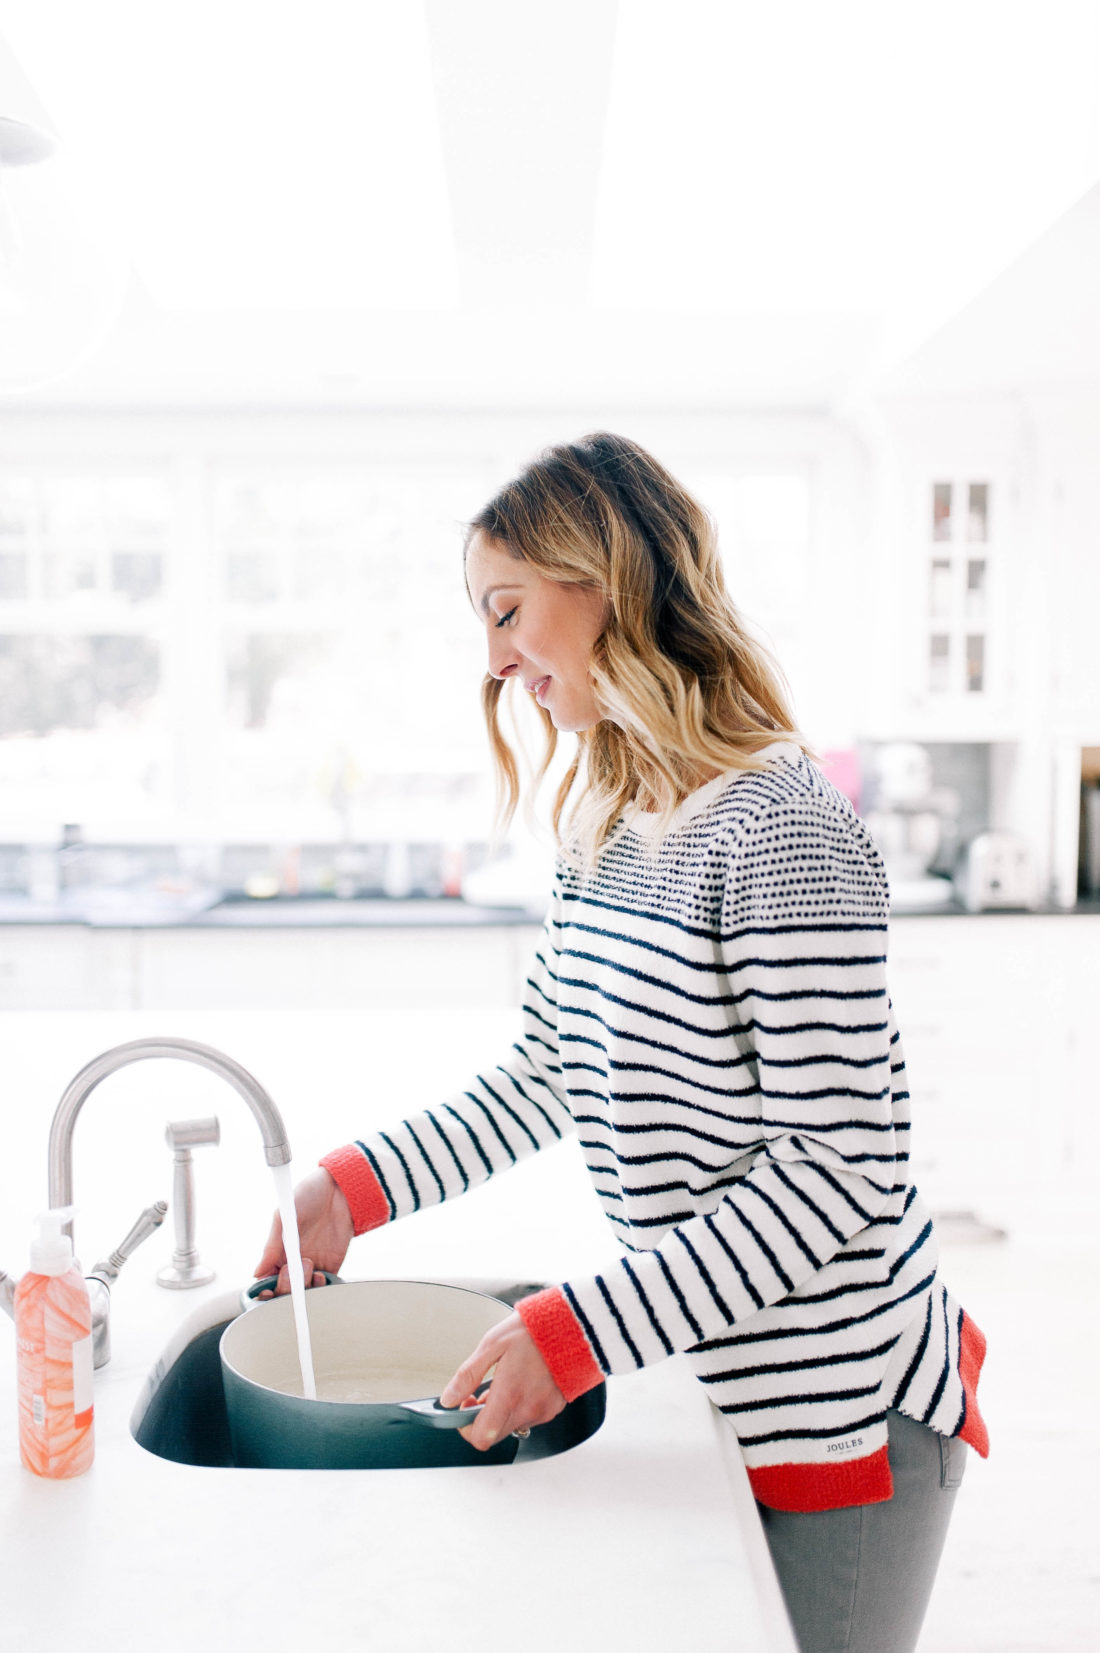 Eva Amurri Martino wears a cozy striped sweater and fills up a pot of water at the kitchen sink